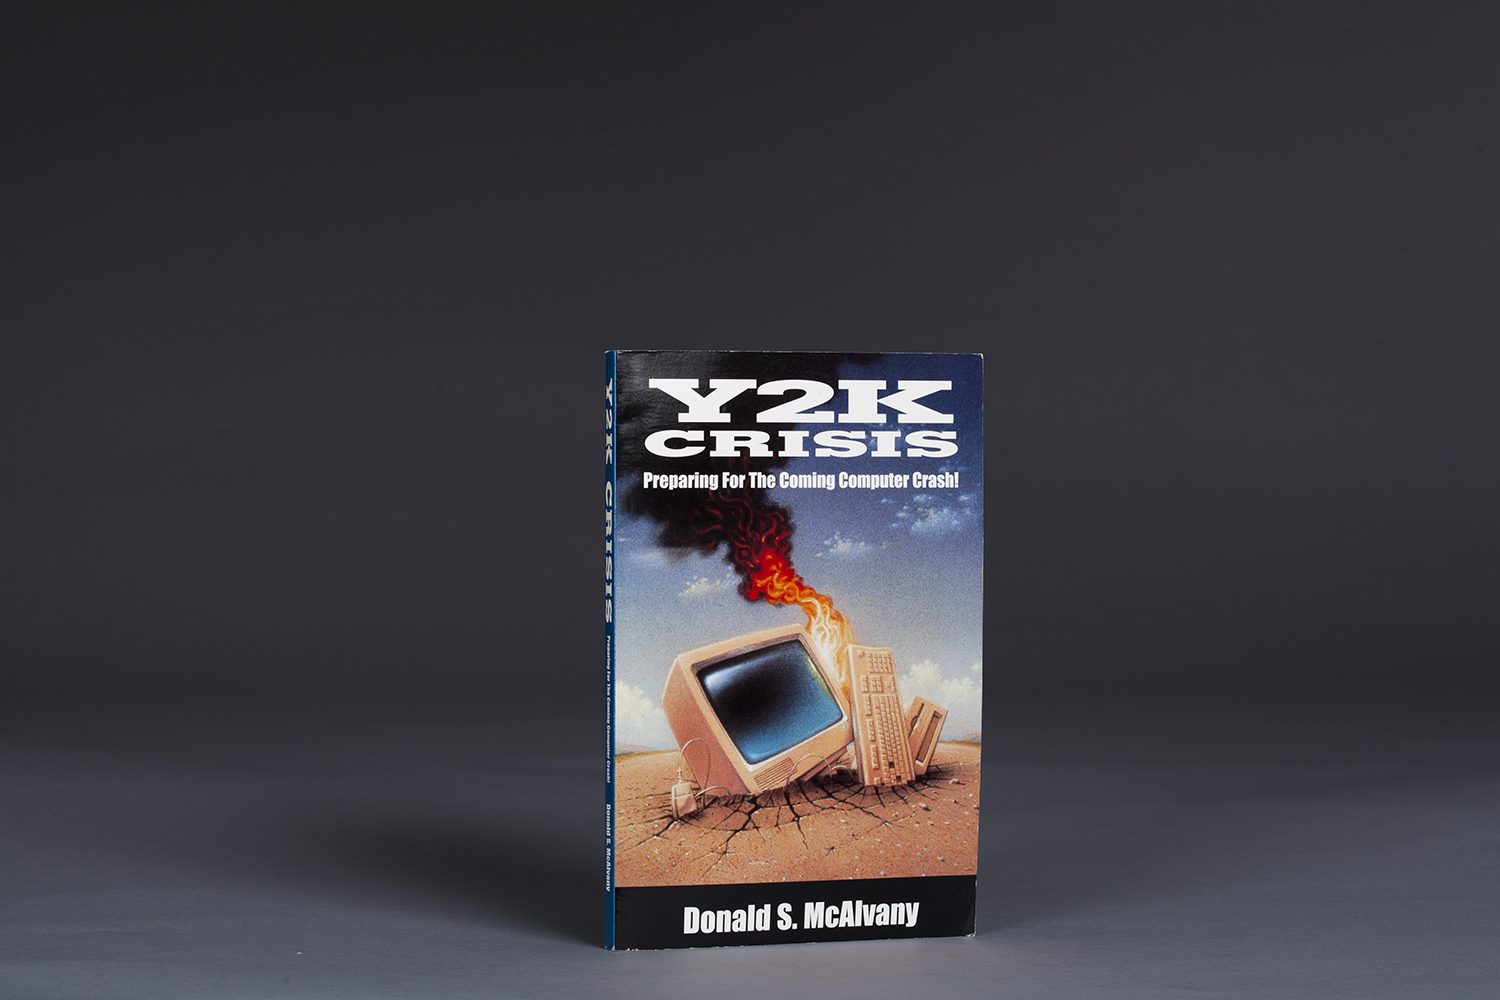 Y2K Crisis Preparing for the Coming Computer Crash - 9853 Cover.jpg